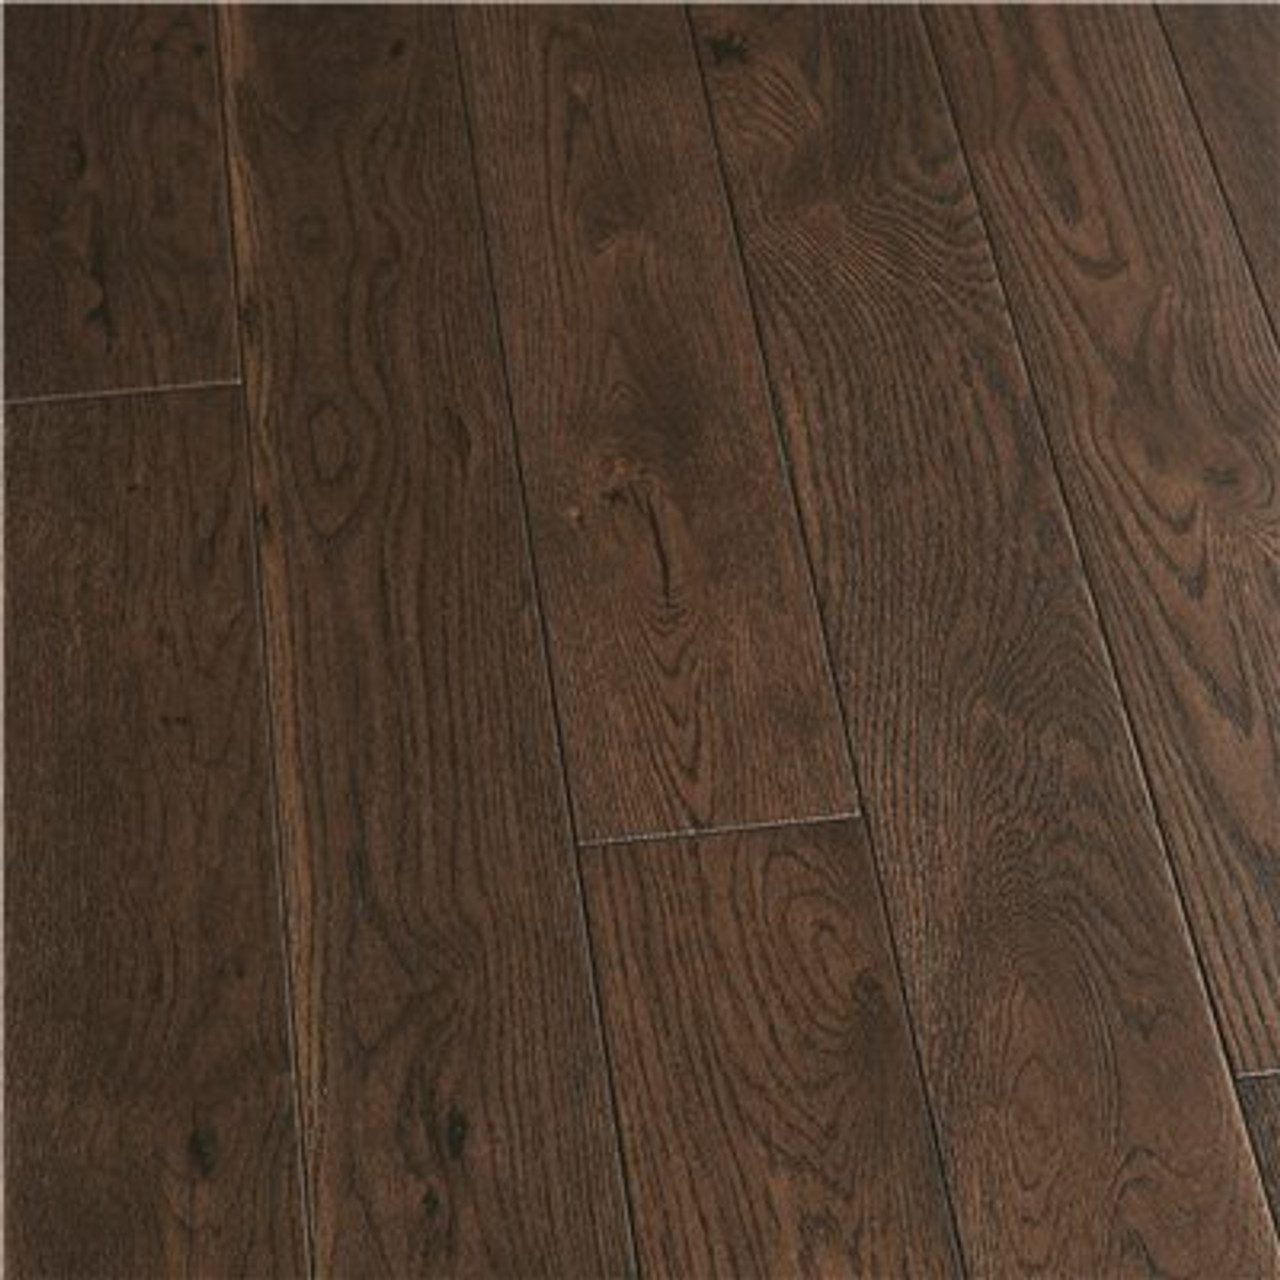 French Oak Pacific Grove 3/4 In. Thick X 5 In. Wide X Varying Length Solid Hardwood Flooring (22.60 Sq. Ft./Case)